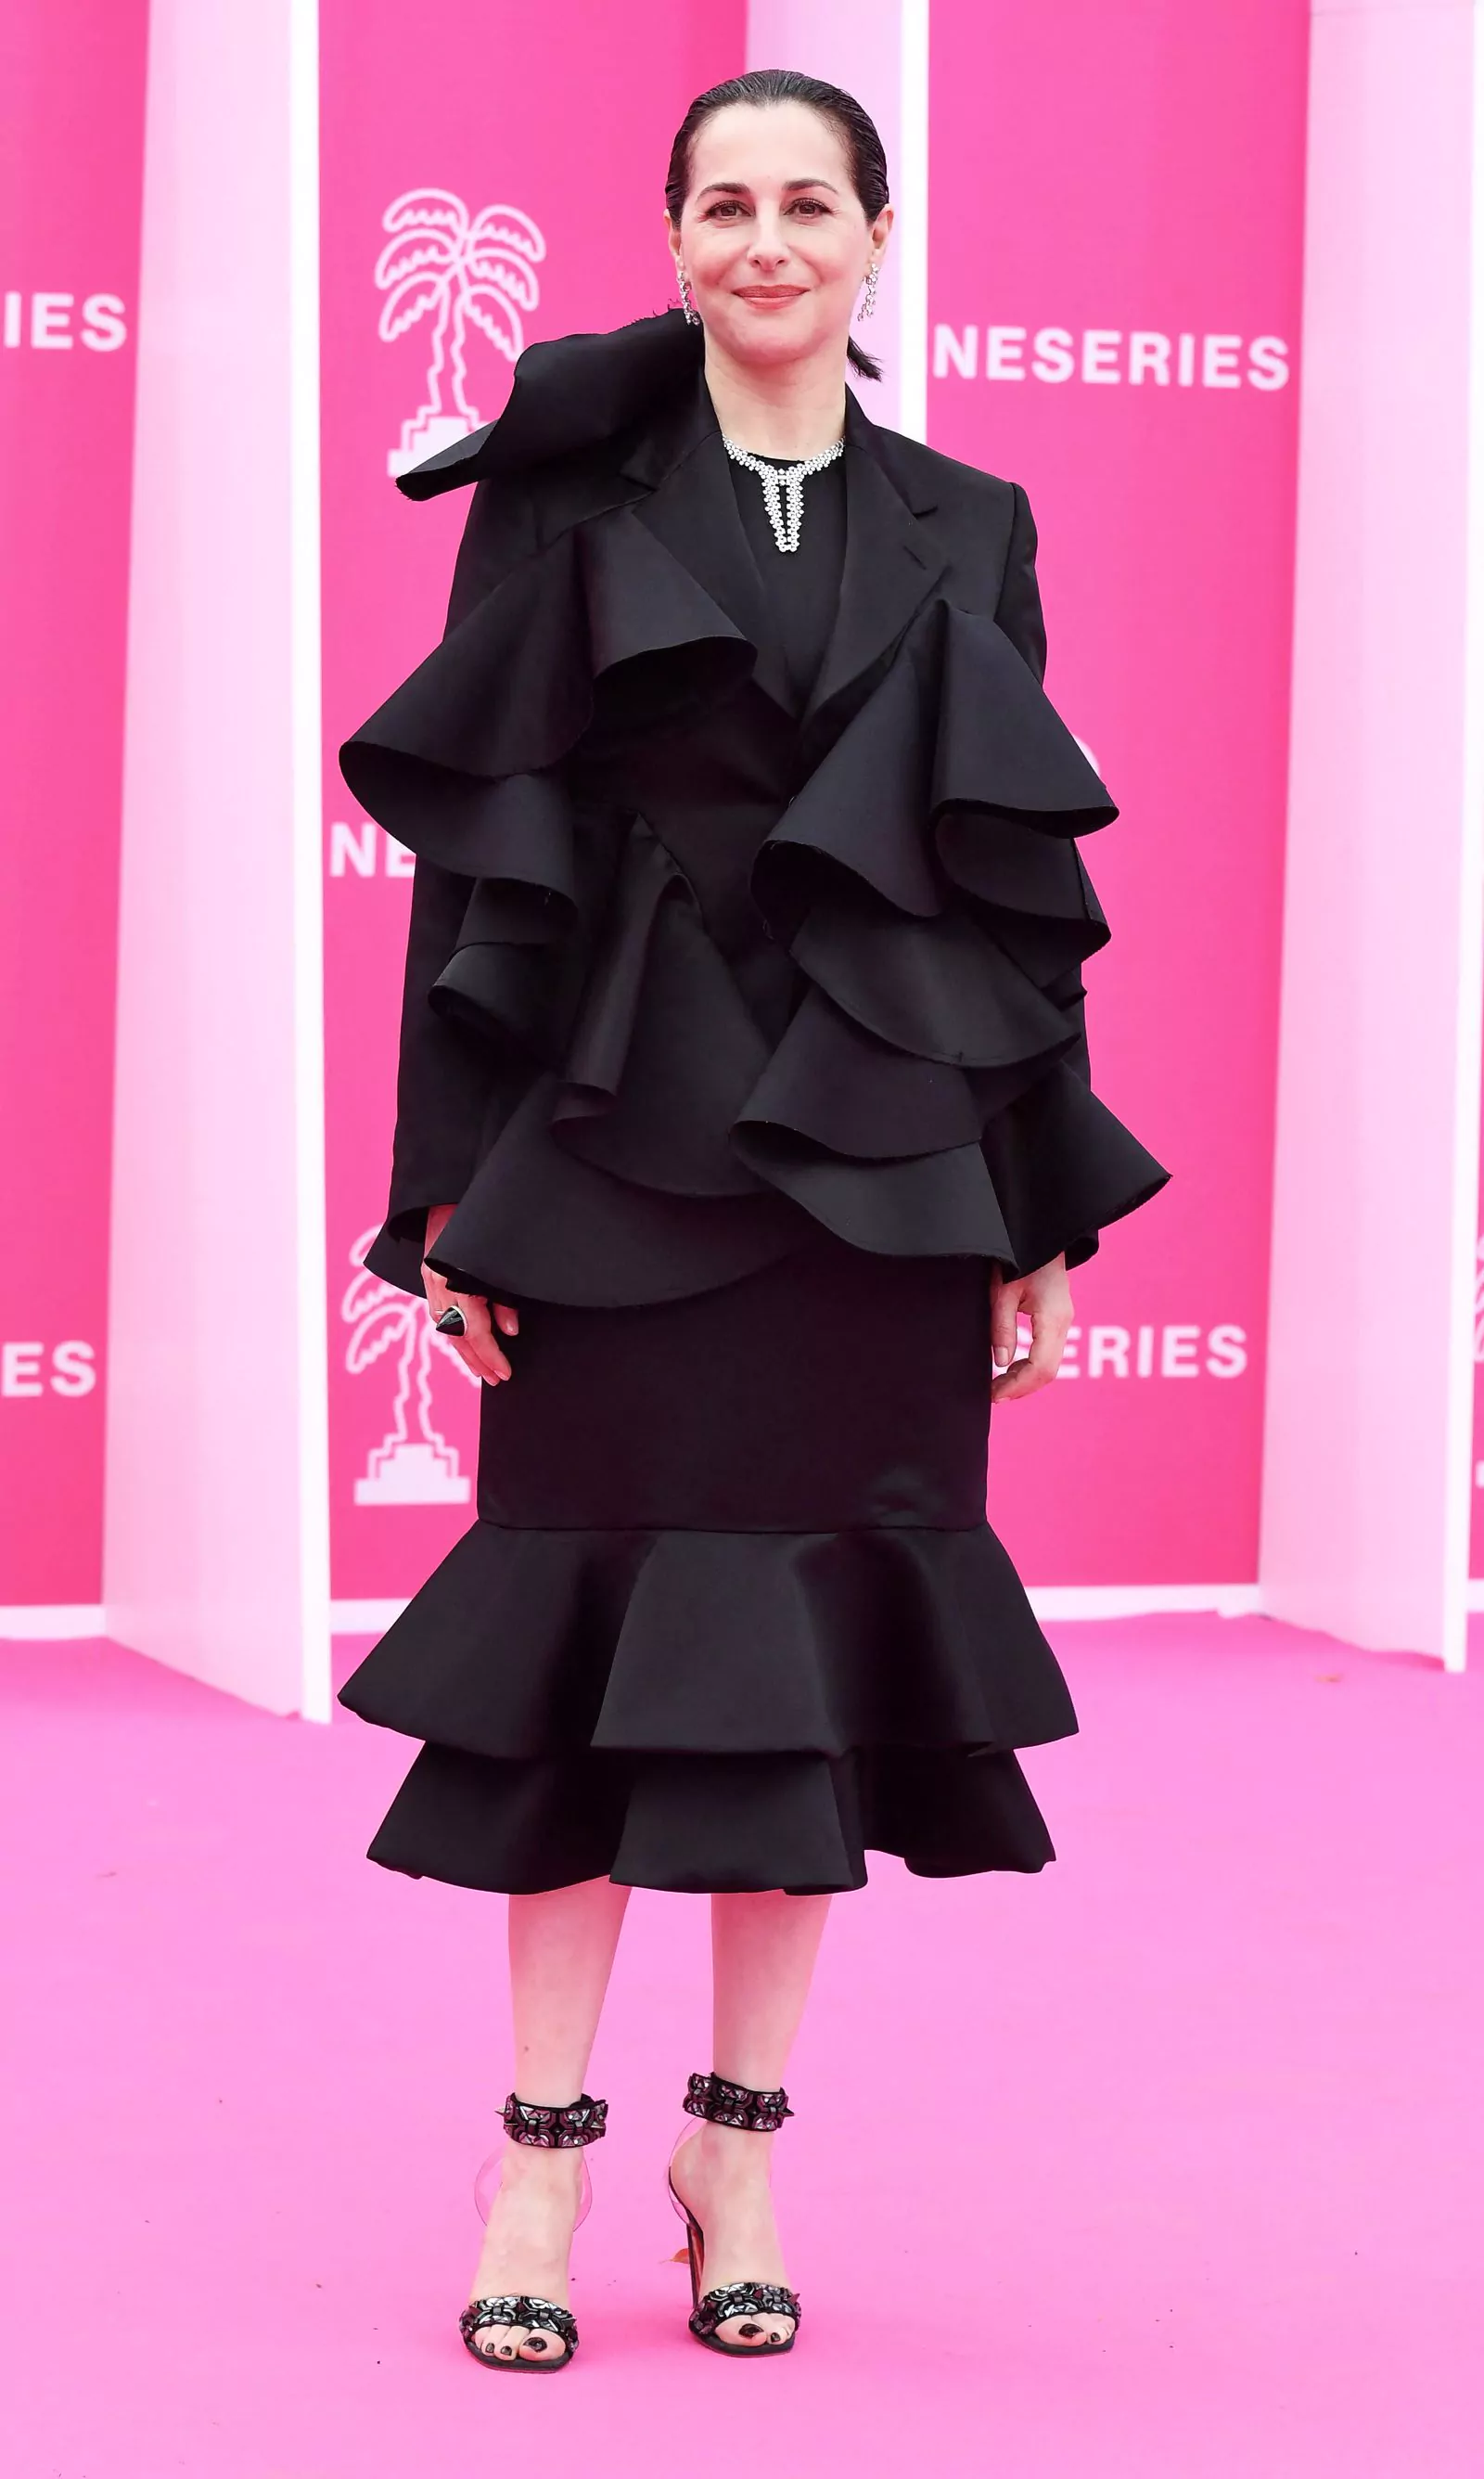 Amira Kasar at the 6th Canneseries 2023 International Festival of Series in Cannes, April 14, 2023